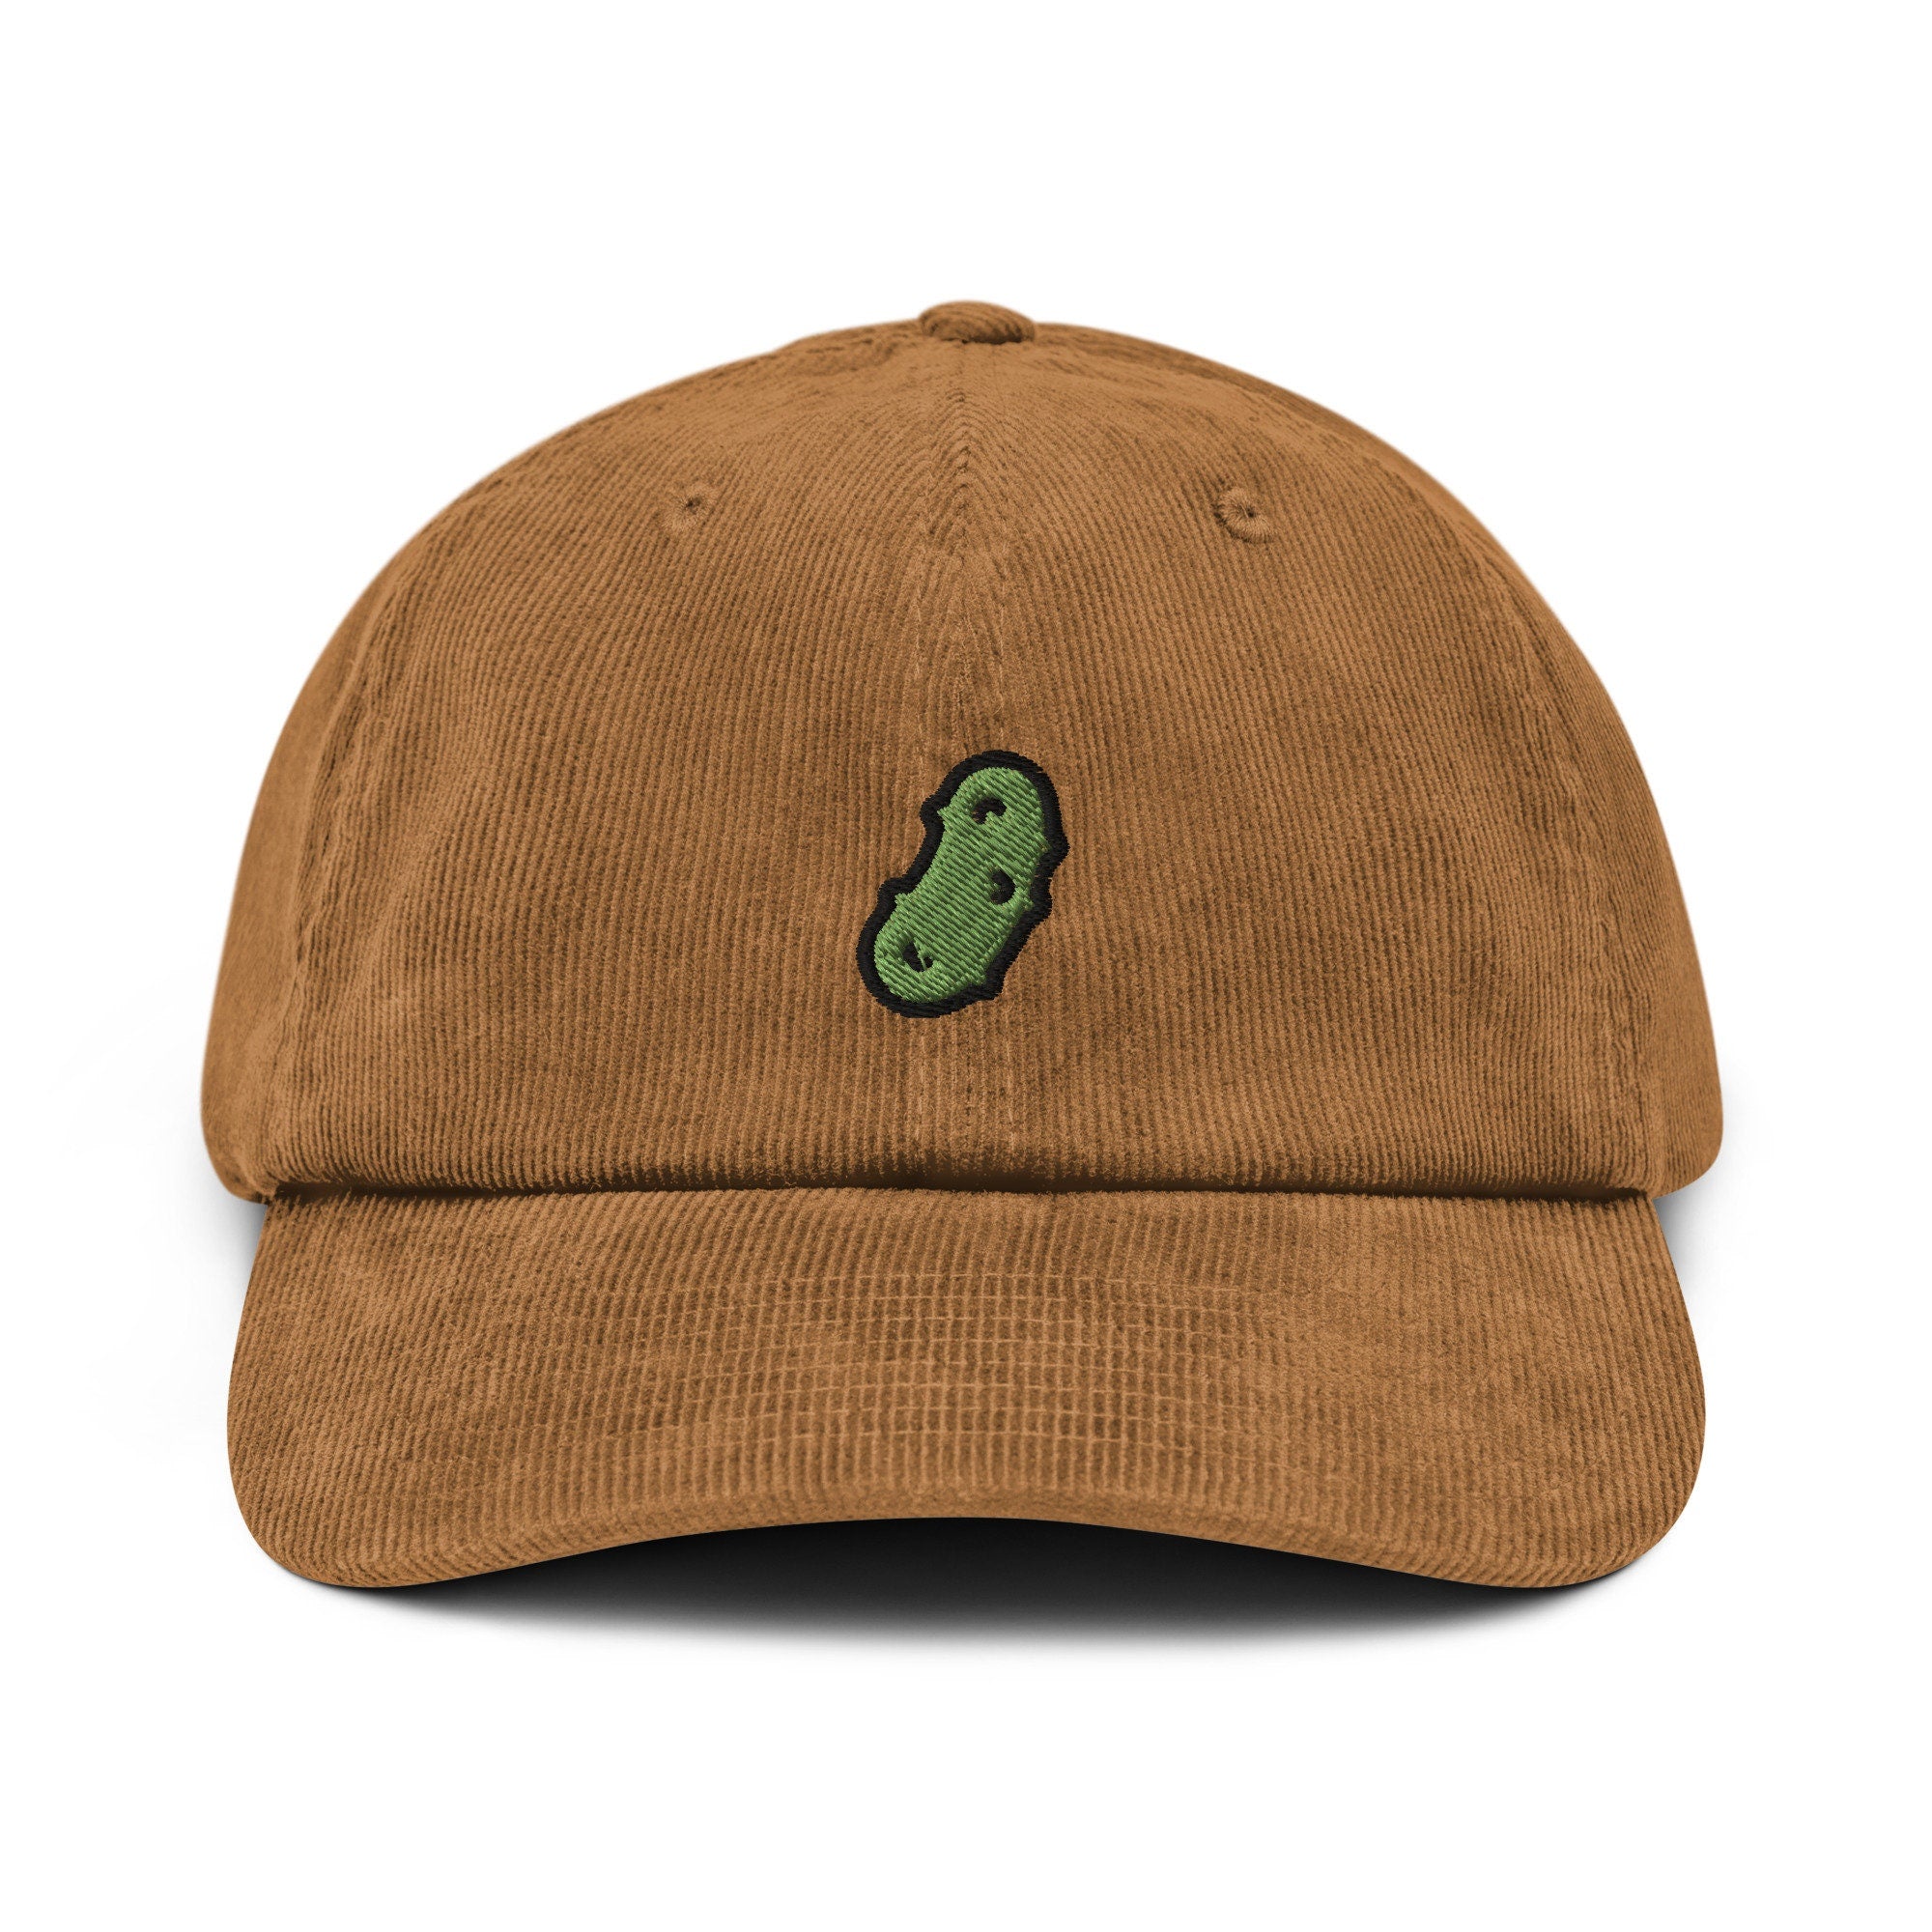 Pickle Corduroy Hat, Handmade Embroidered Corduroy Dad Cap - Multiple Colors